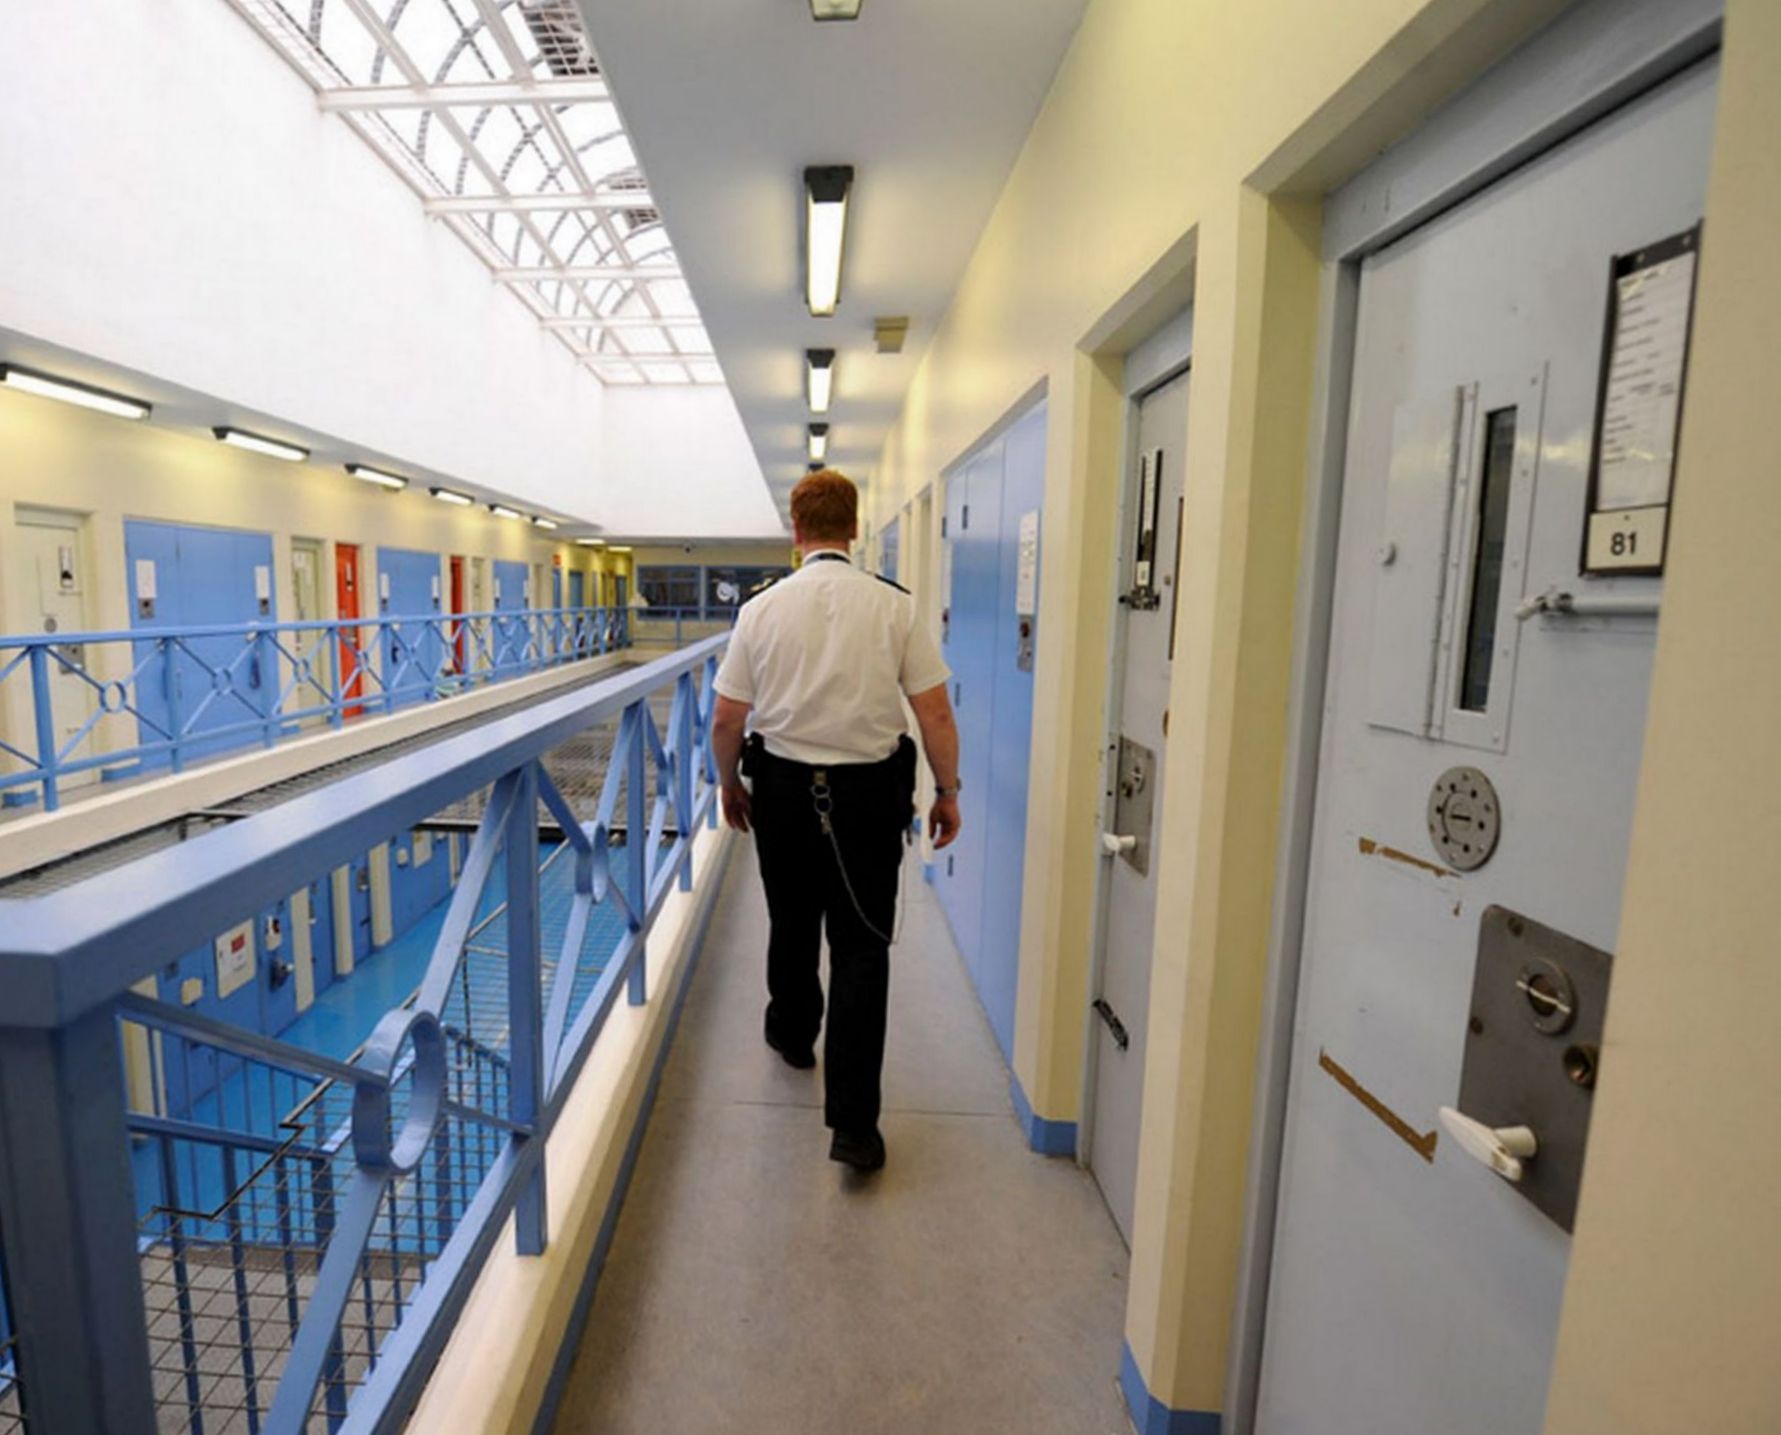 ASSAULTS ON PRISON STAFF REMAINS A KEY CONCERN